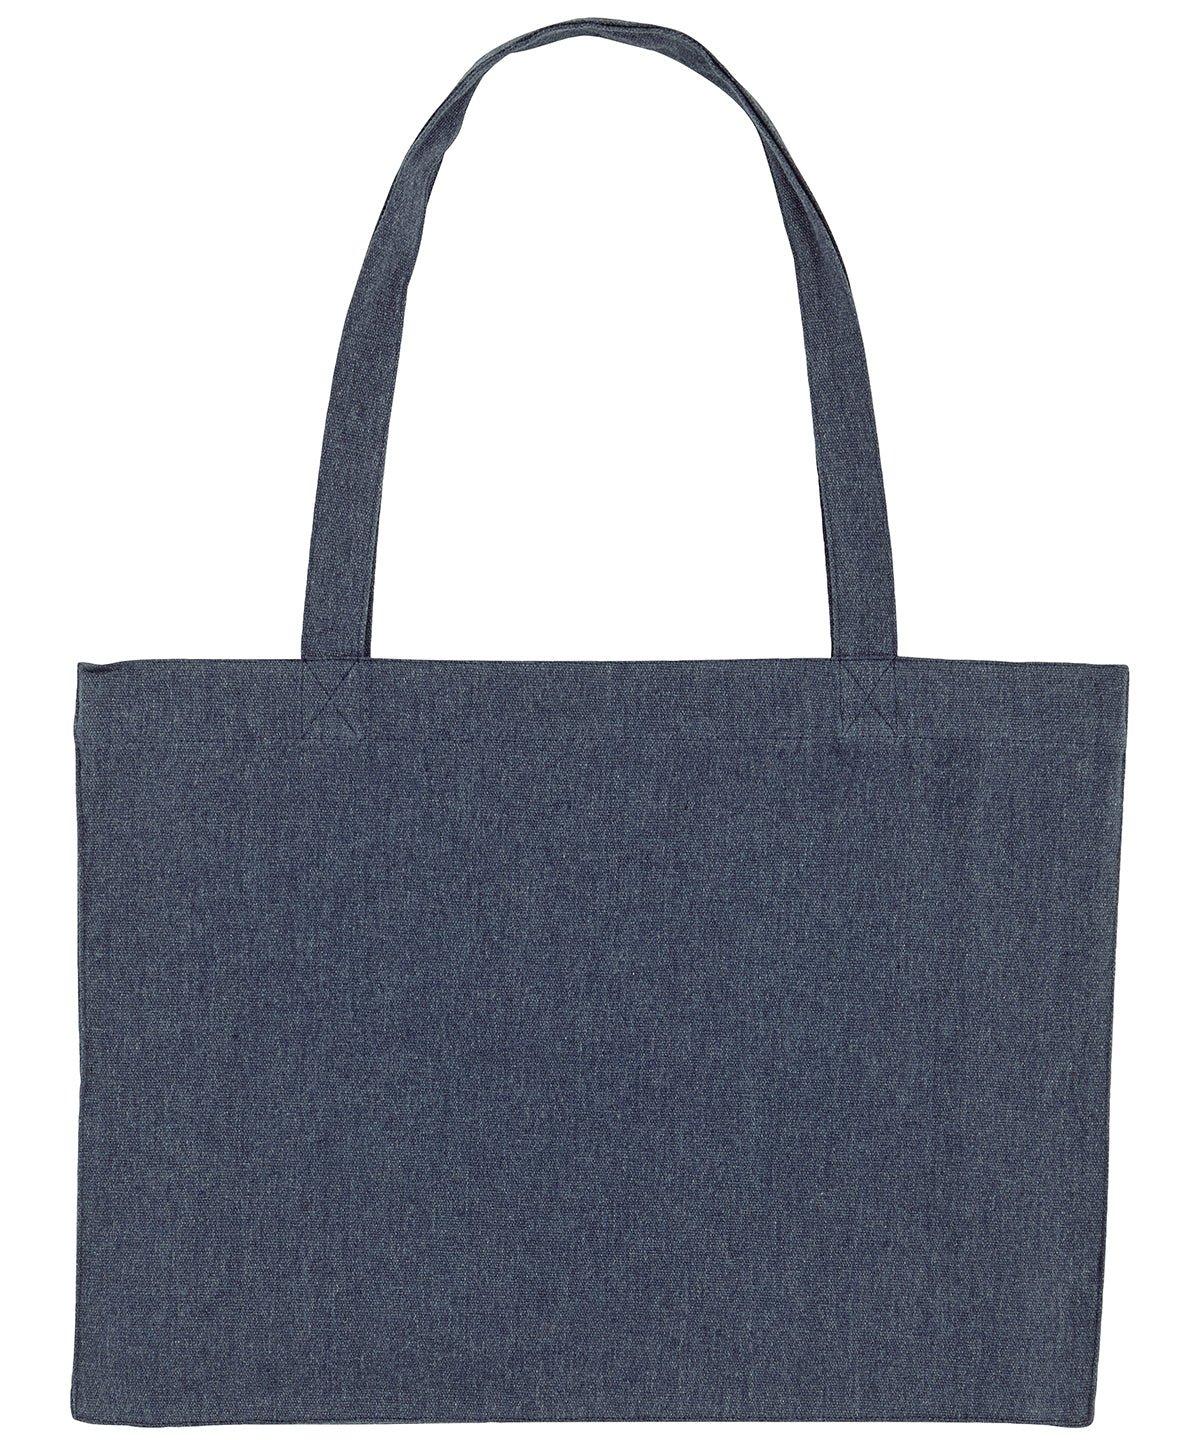 A photo showing the shape of the midnight blue organic cotton tote